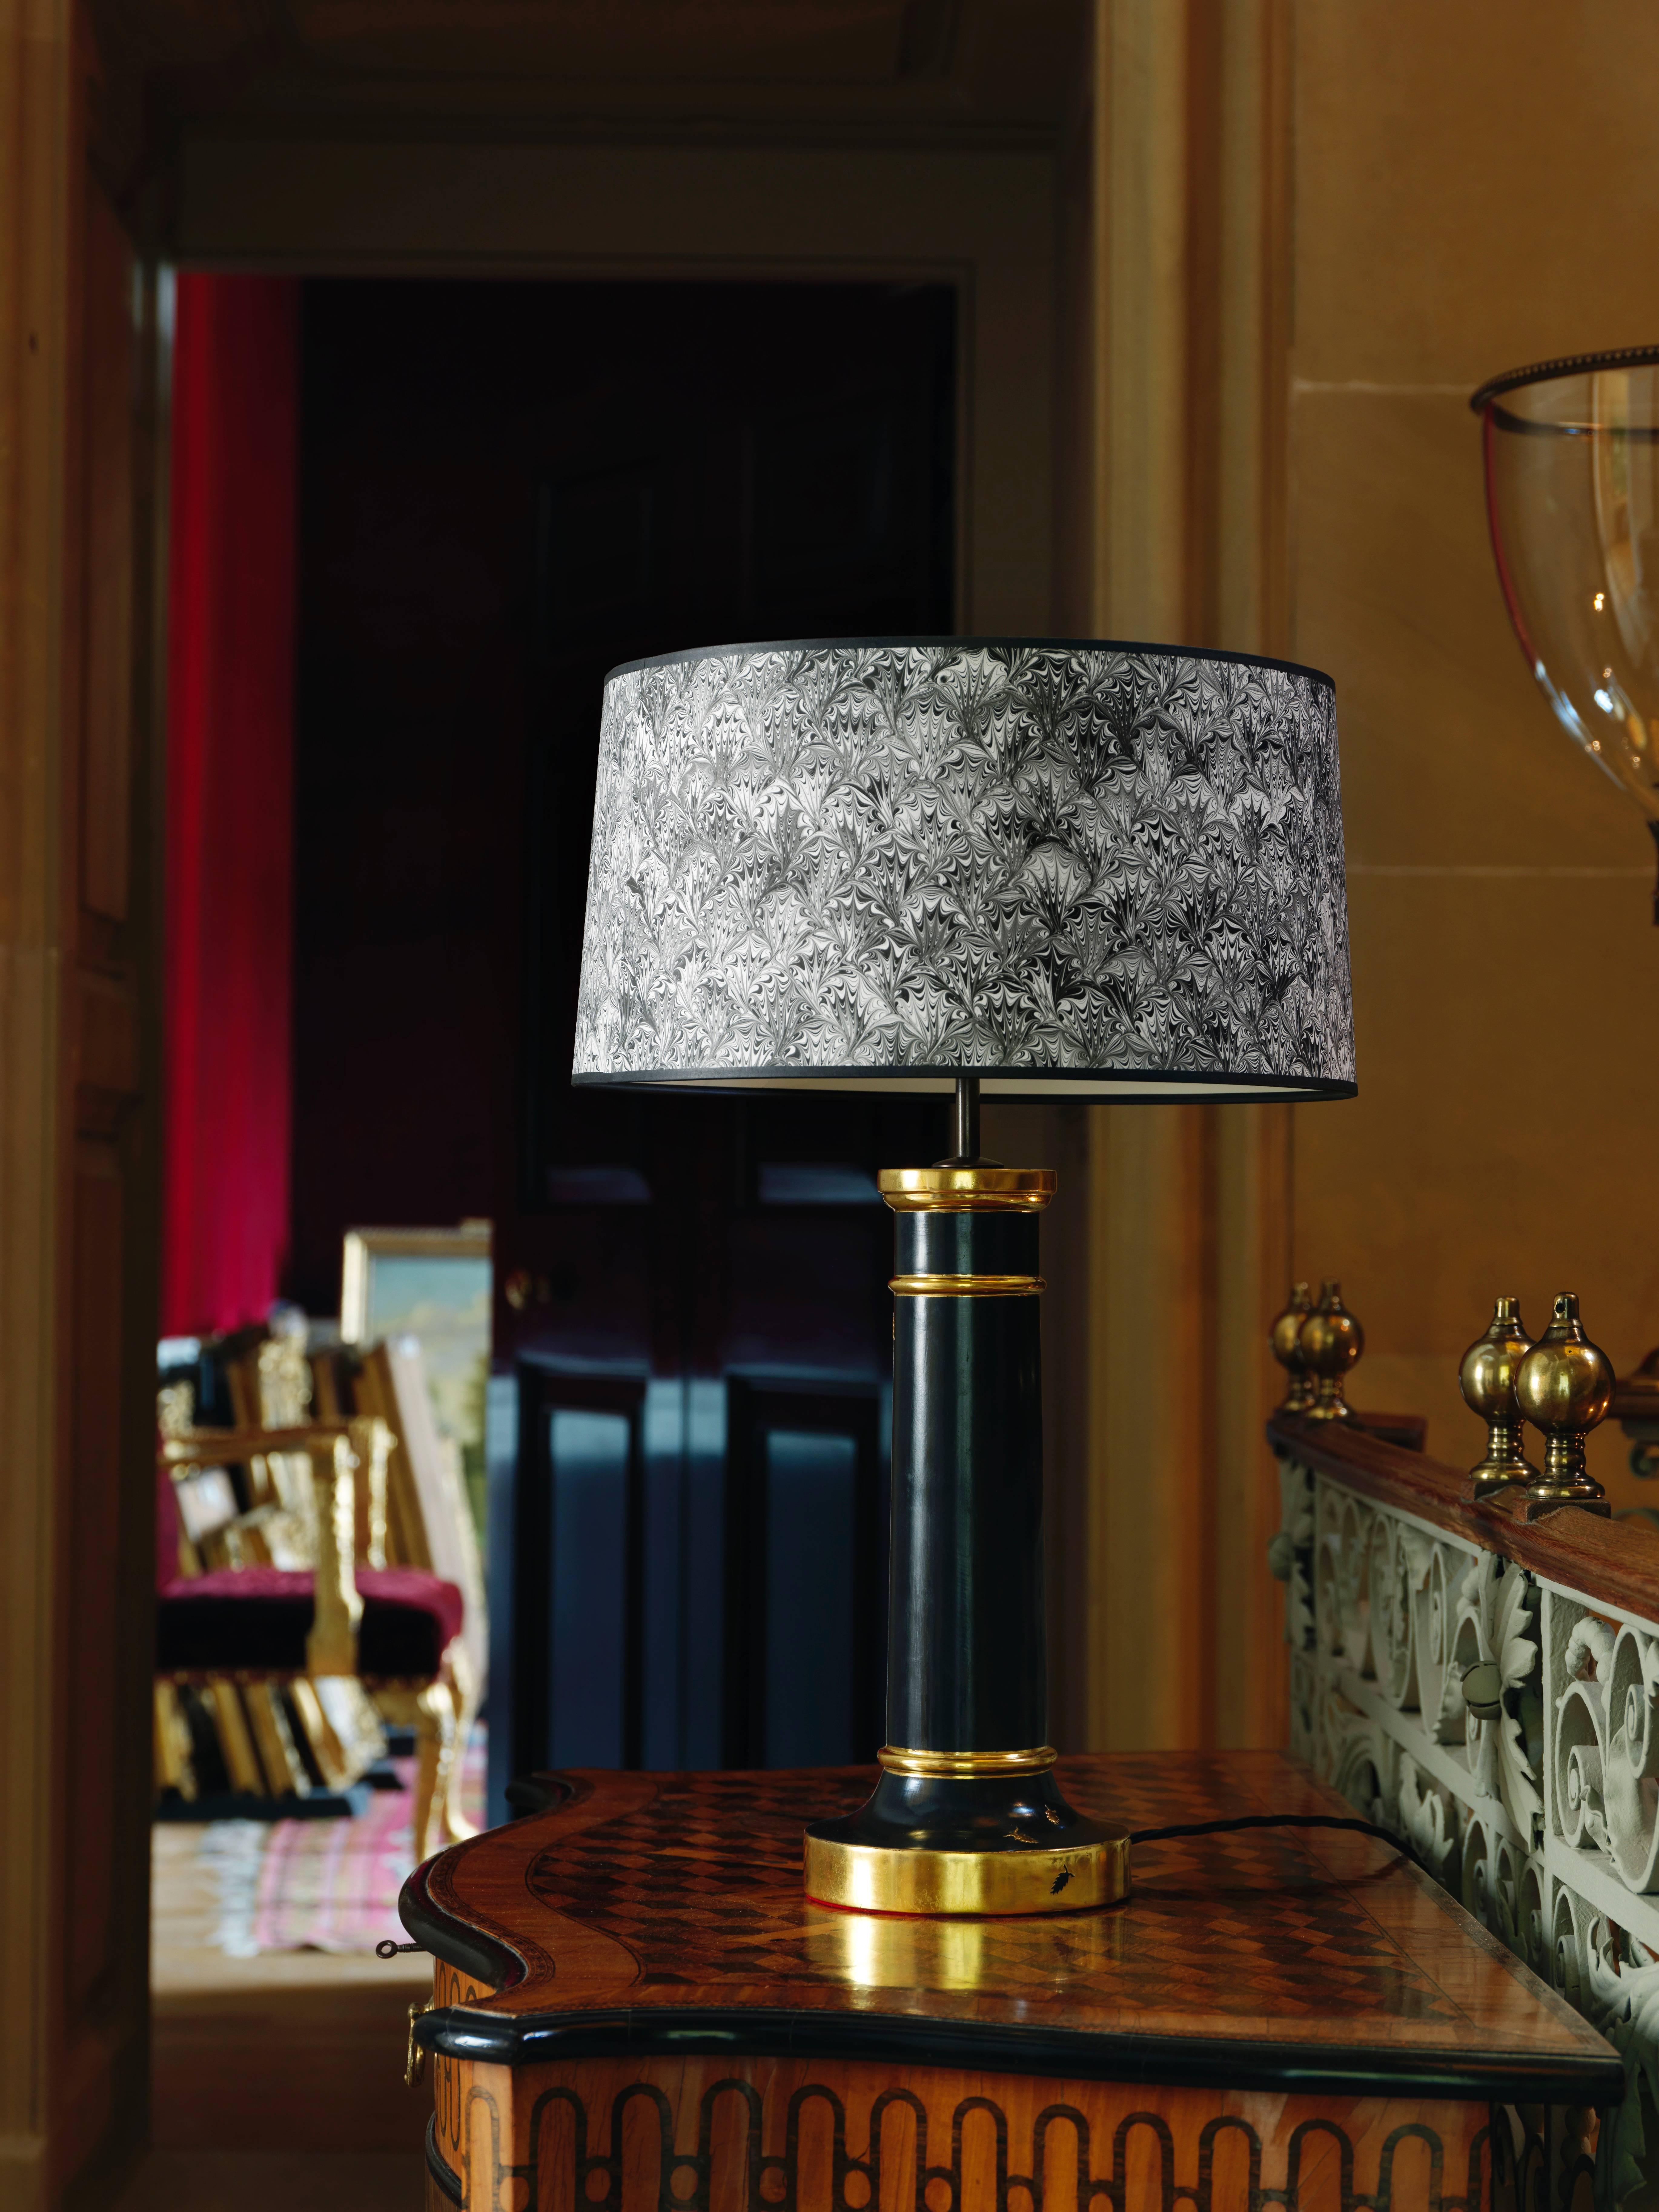 The lamp base is gessoed with gilded hand drawn raised gesso woodlice detail in 23.5-carat gold leaf and burnished gunmetal grey clay. The fittings are dark brass with black silk covered flex.